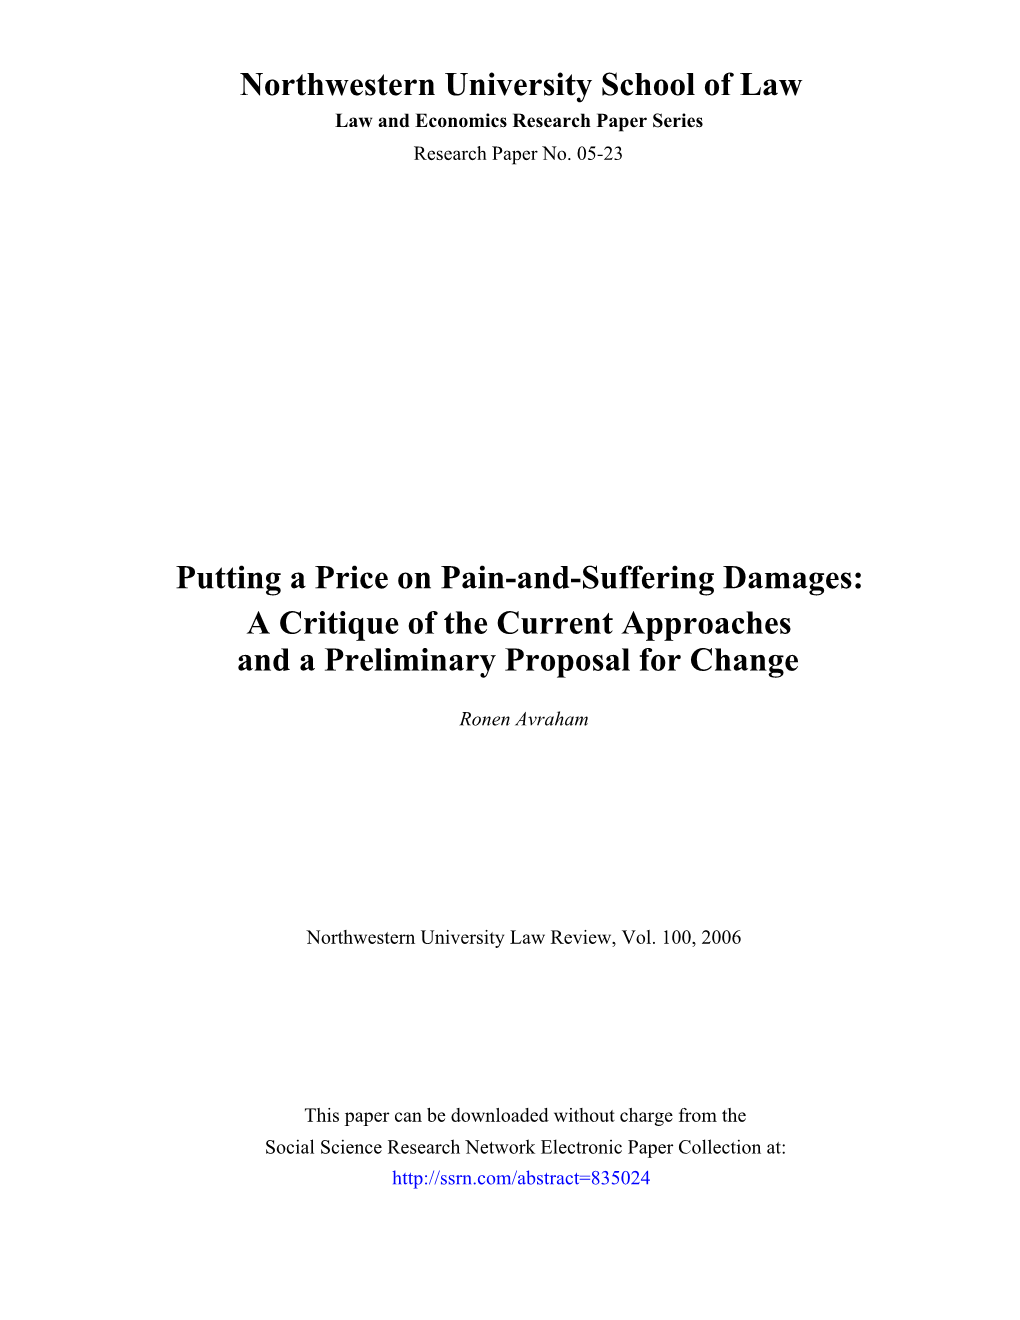 Northwestern University School of Law Putting a Price on Pain-And-Suffering Damages: a Critique of the Current Approaches and A